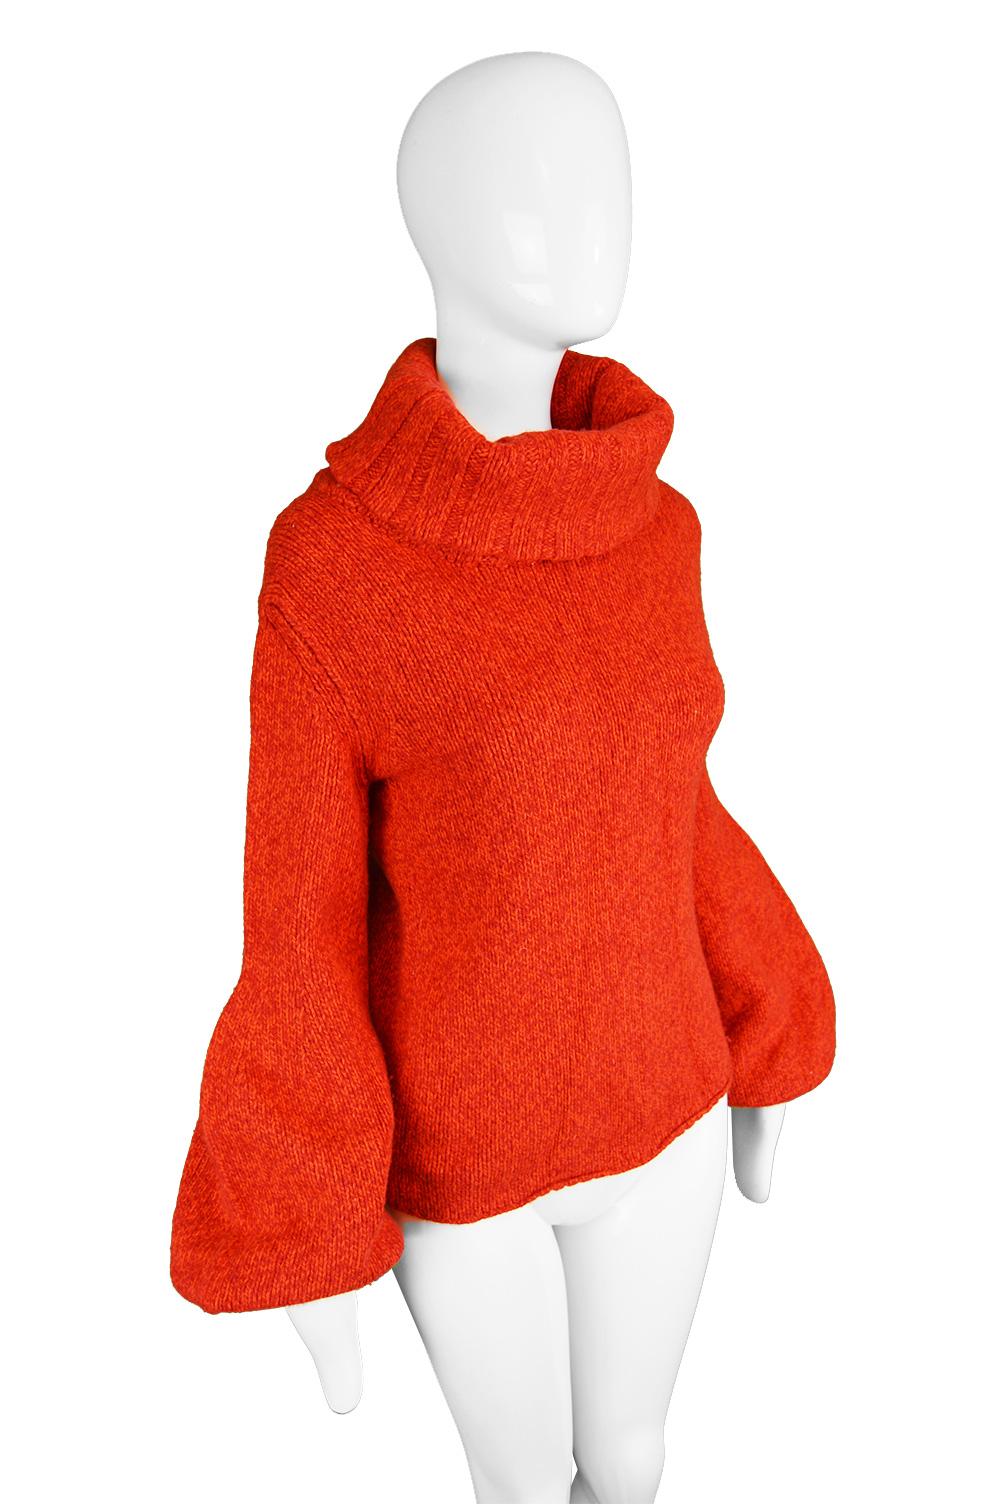 Mila Schon Vintage Red Wool & Cashmere Balloon Sleeve Roll Neck Sweater, 1980s 1